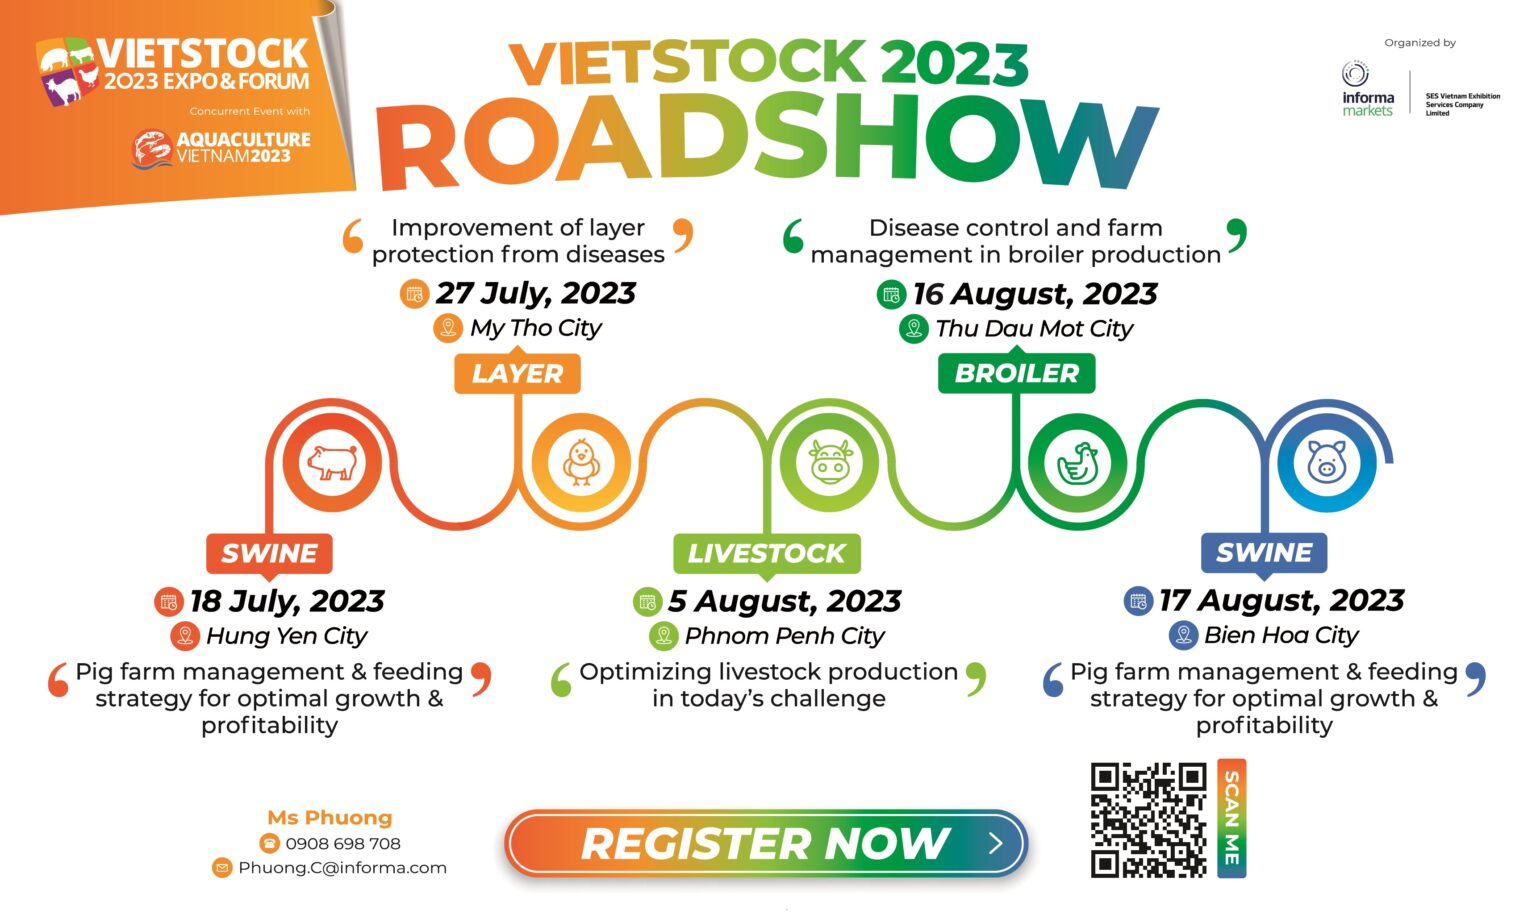 Before the exhibition on October 11-13, Vietstock officially launched 05 specialized roadshows in July and August in the livestock provinces: Hung Yen, Tien Giang, Binh Duong, Dong Nai and especially Phnom Penh, Cambodia.